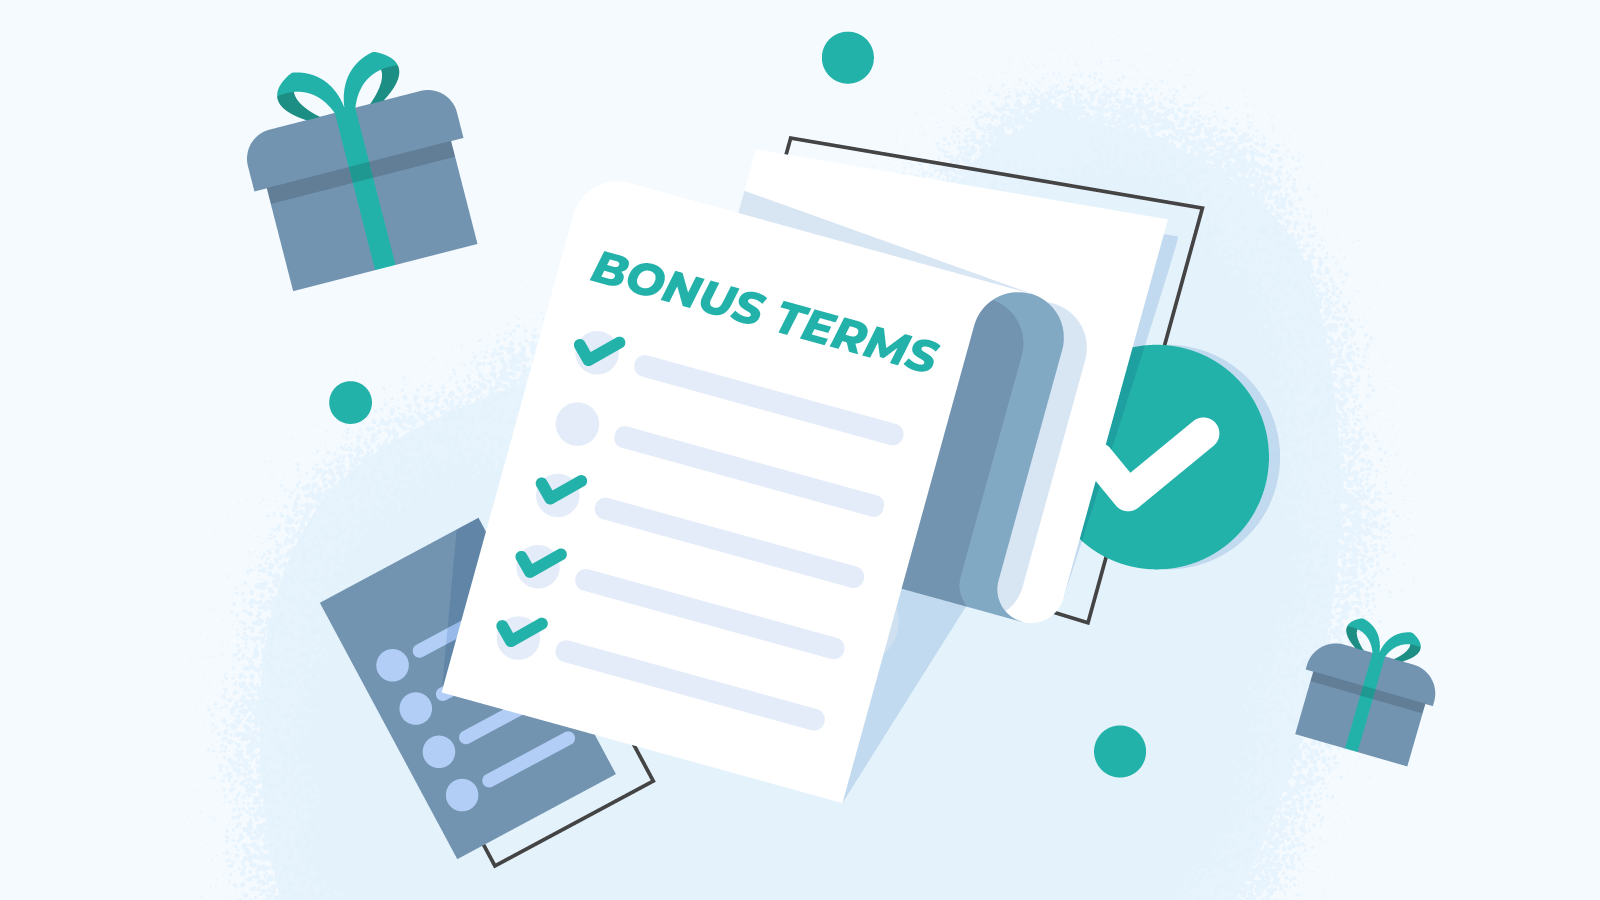 What should you know about bonus terms